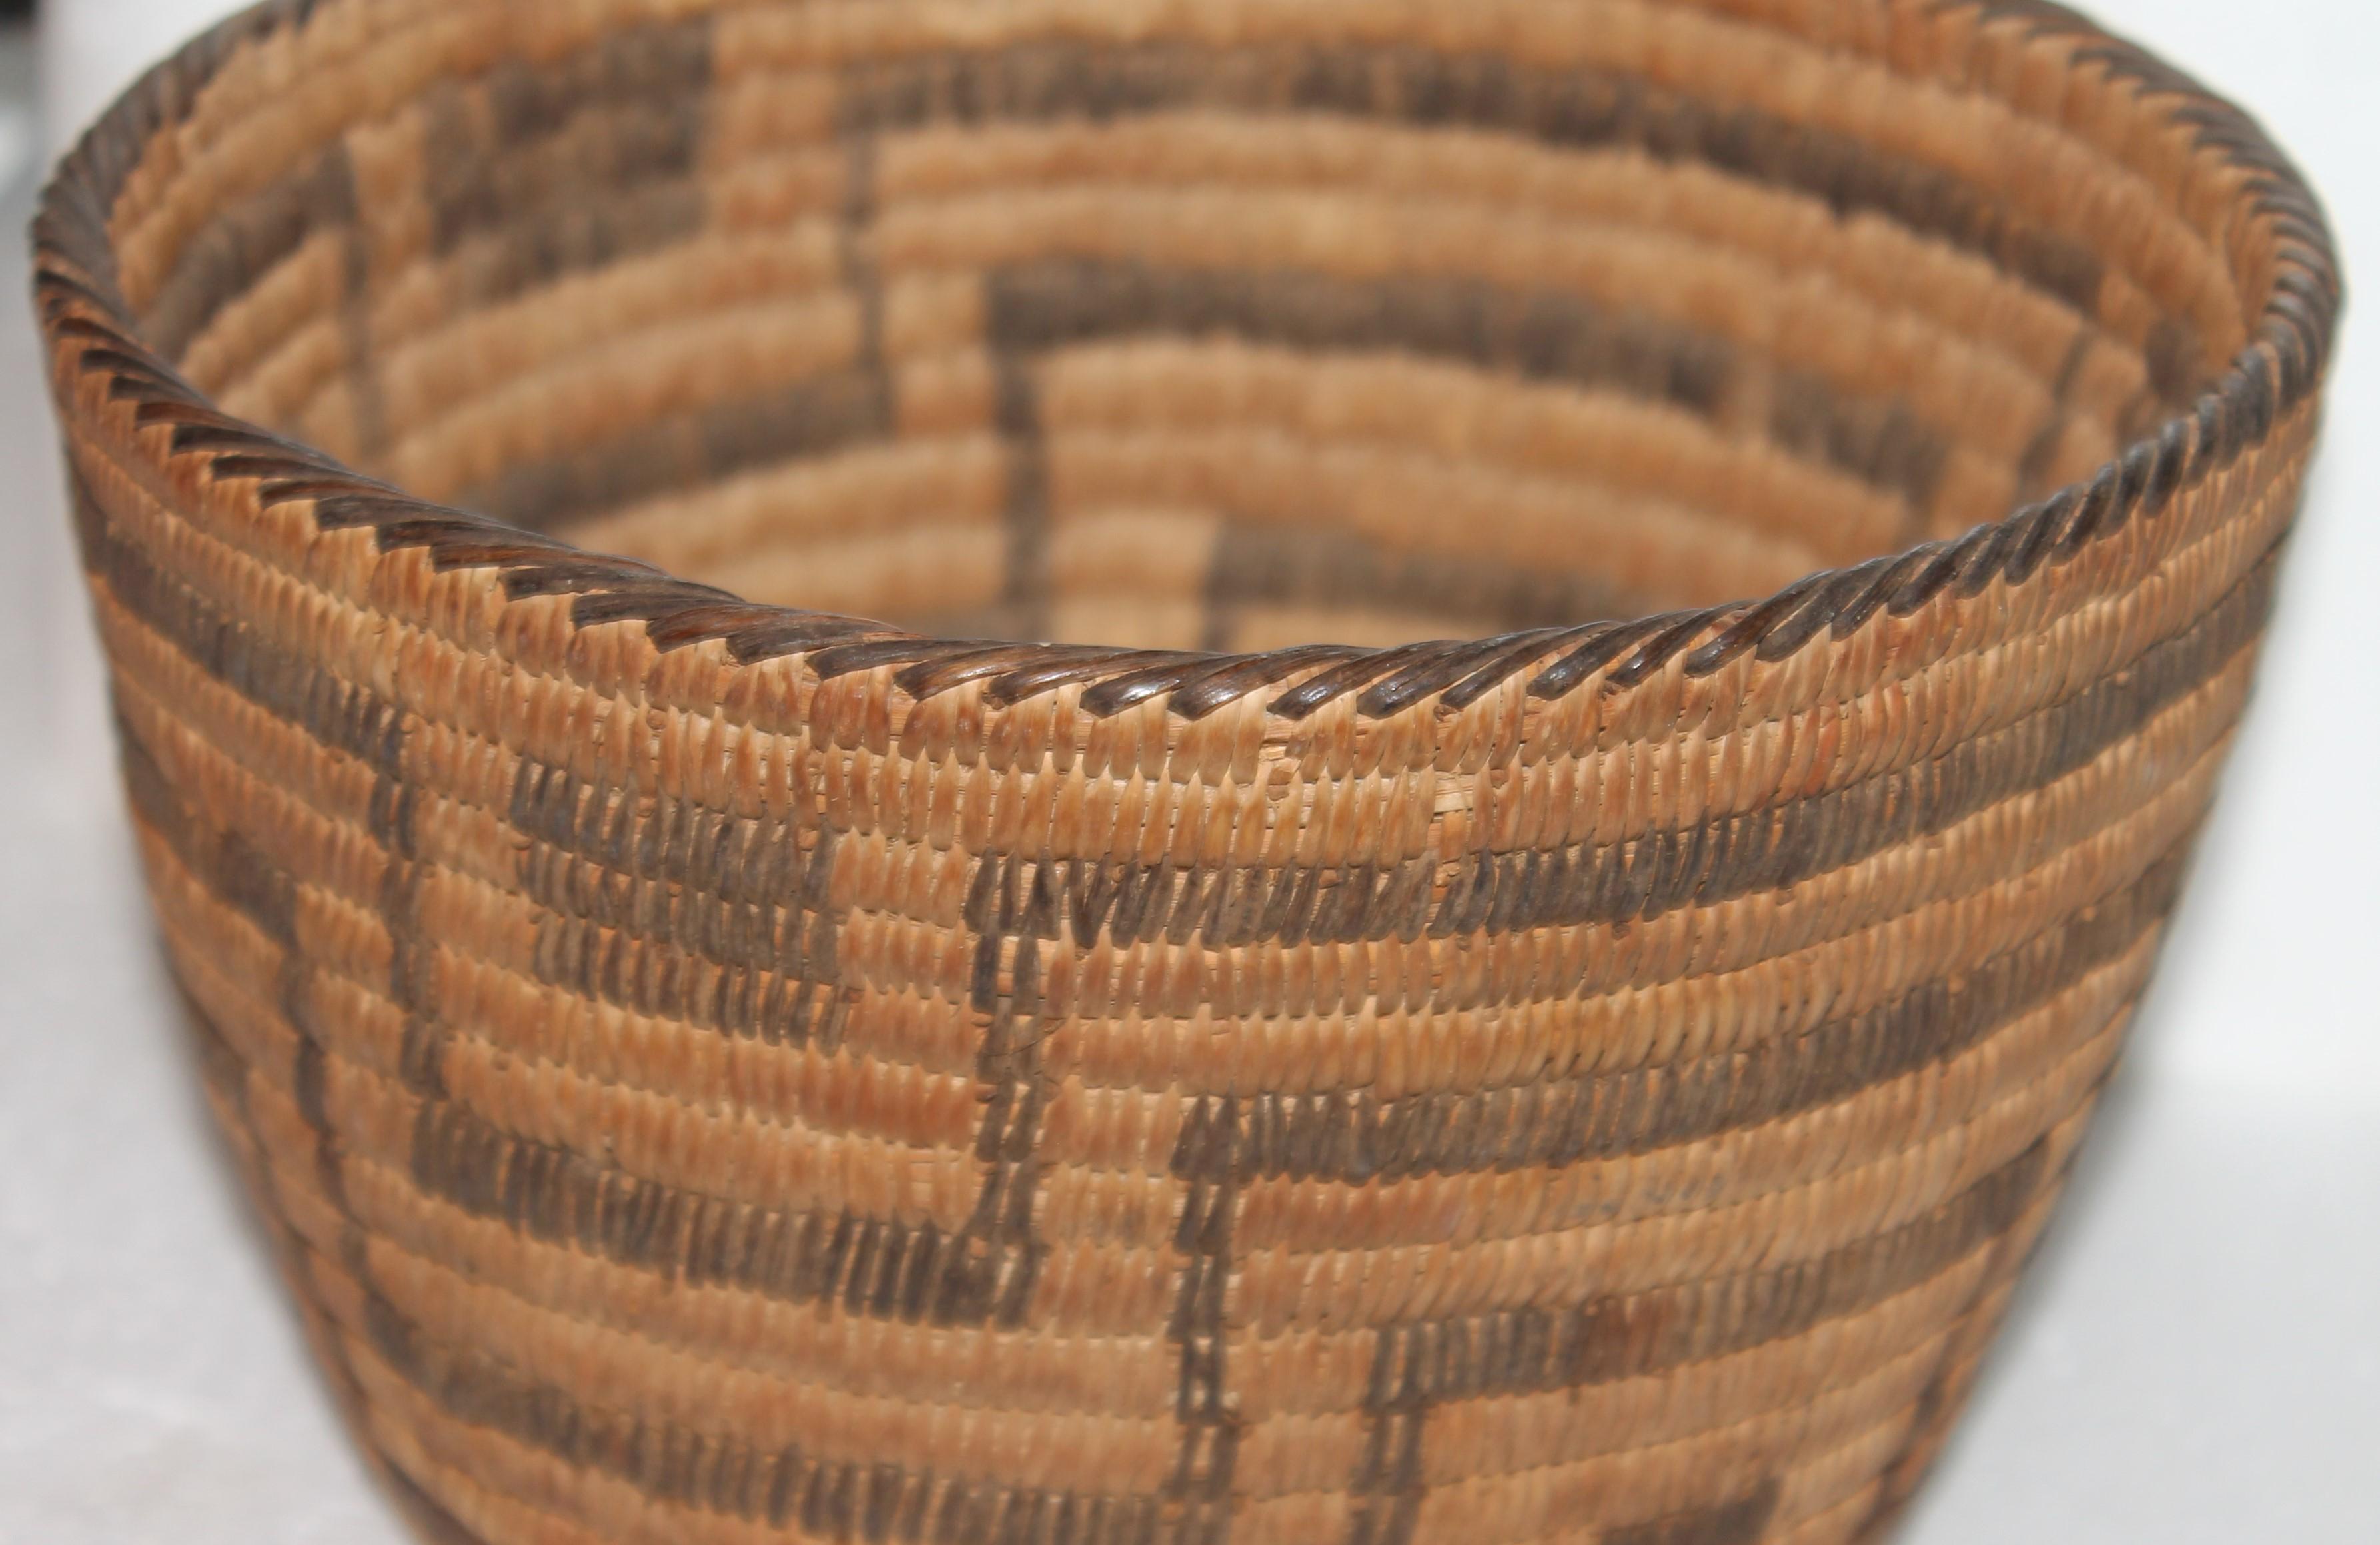 This fine and very early Pima American Indian hand woven basket is in fine as found condition. This wonderful basket has a nice aged patina and has come from a private American Indian collection.